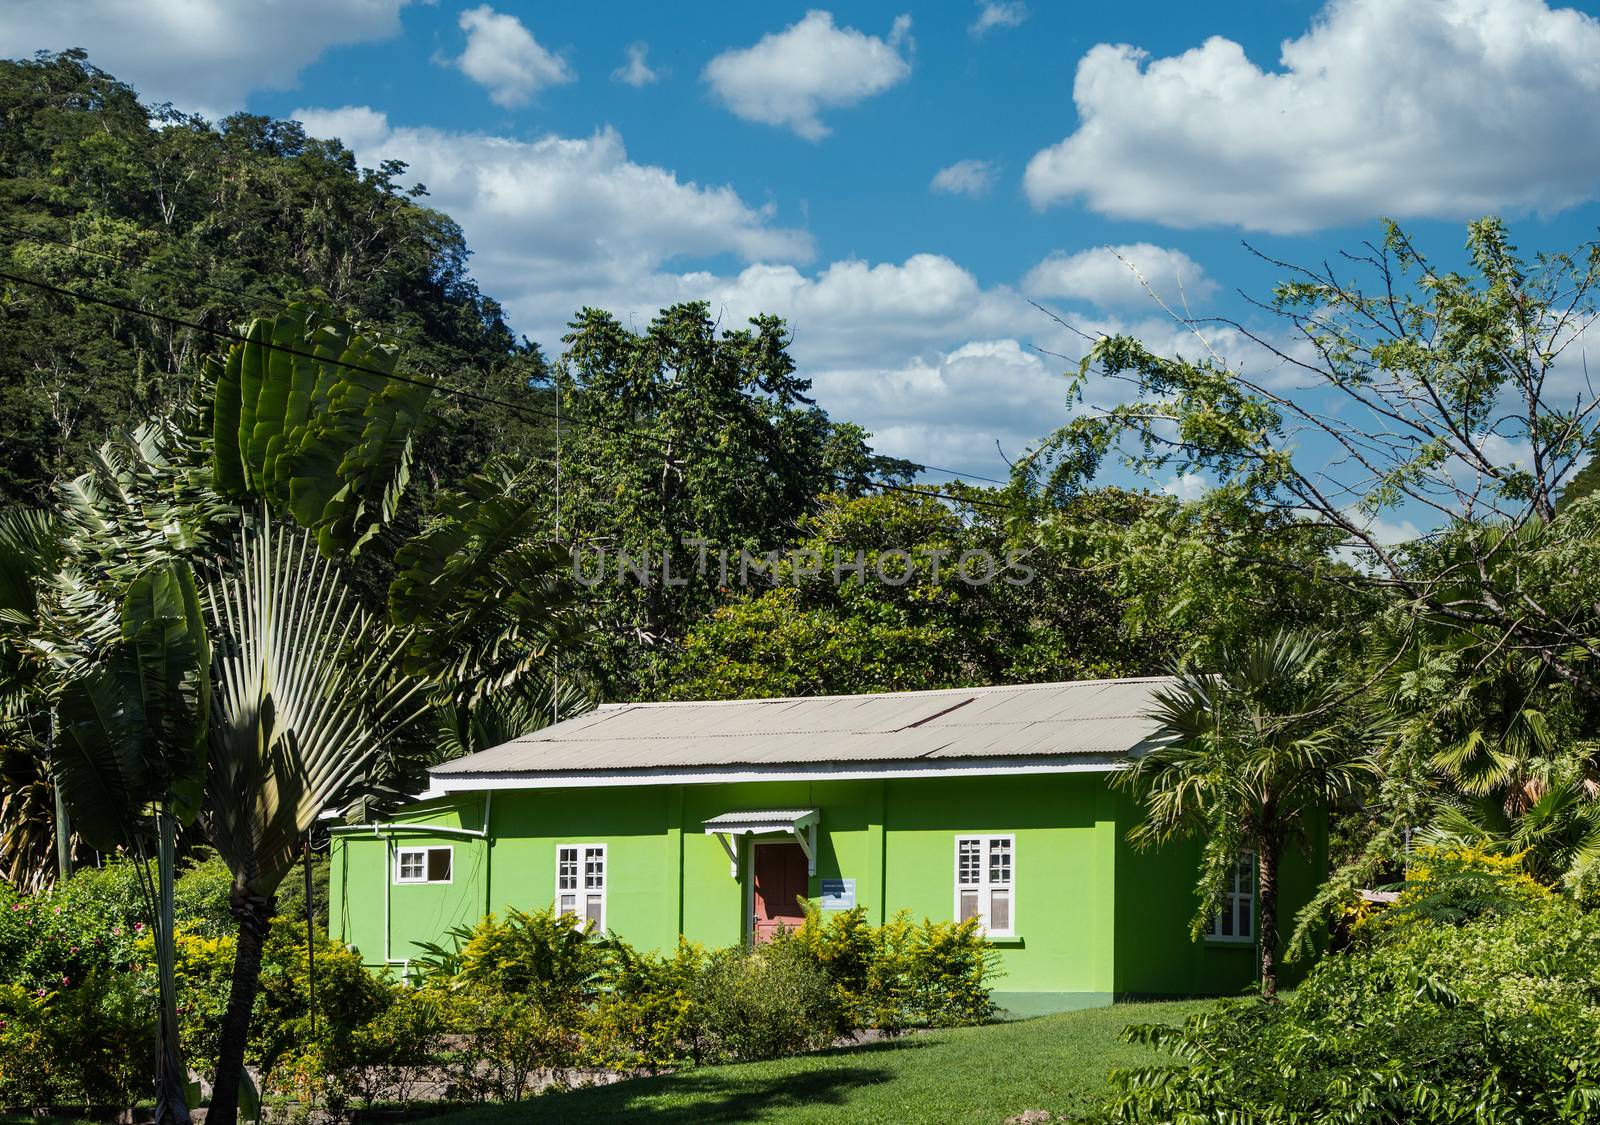 Green Bungalow in Tropics among palms